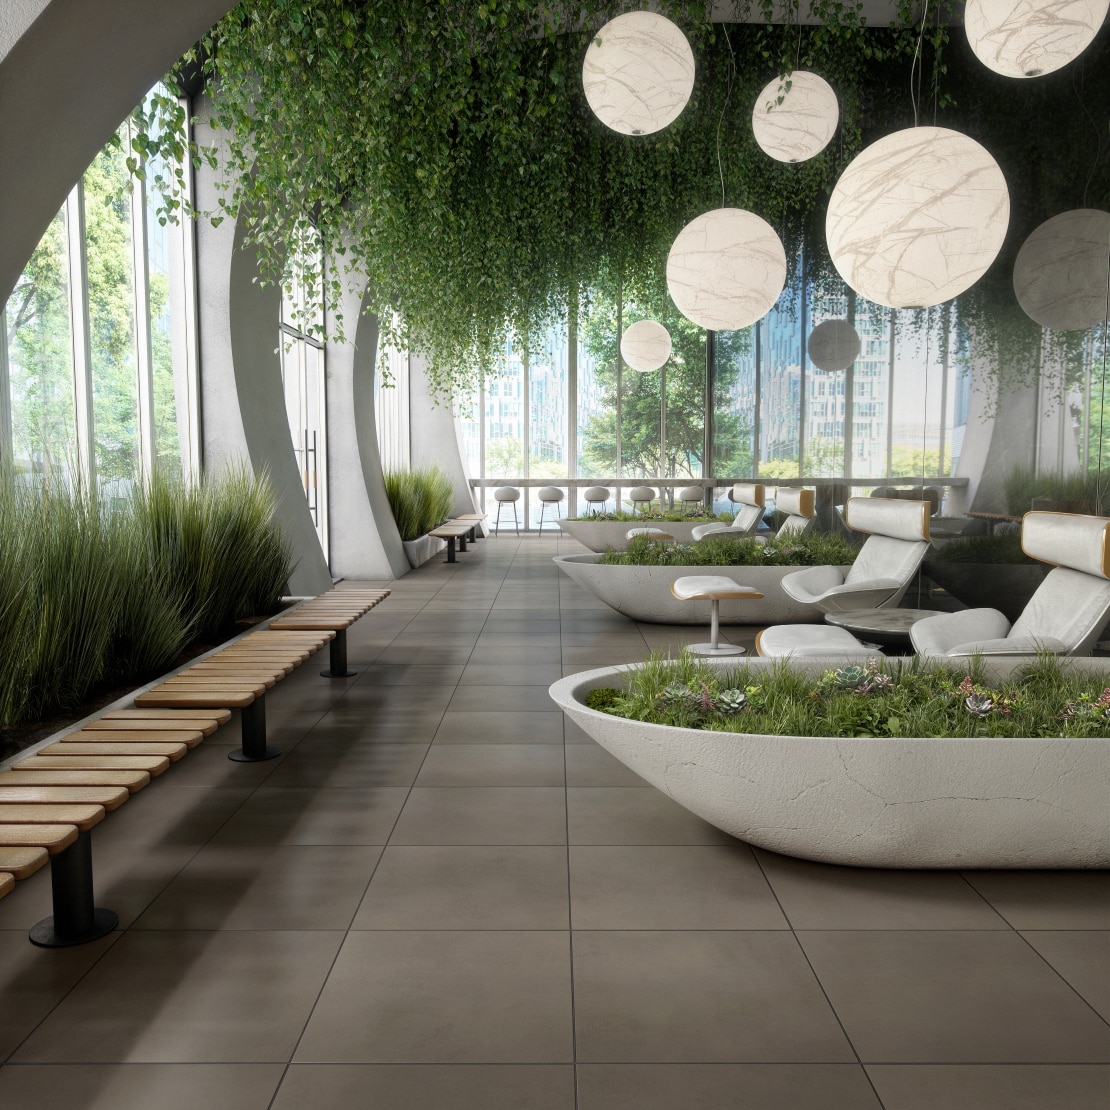 Garden room with plants on the ceiling, orb lights and concrete looking flooring.